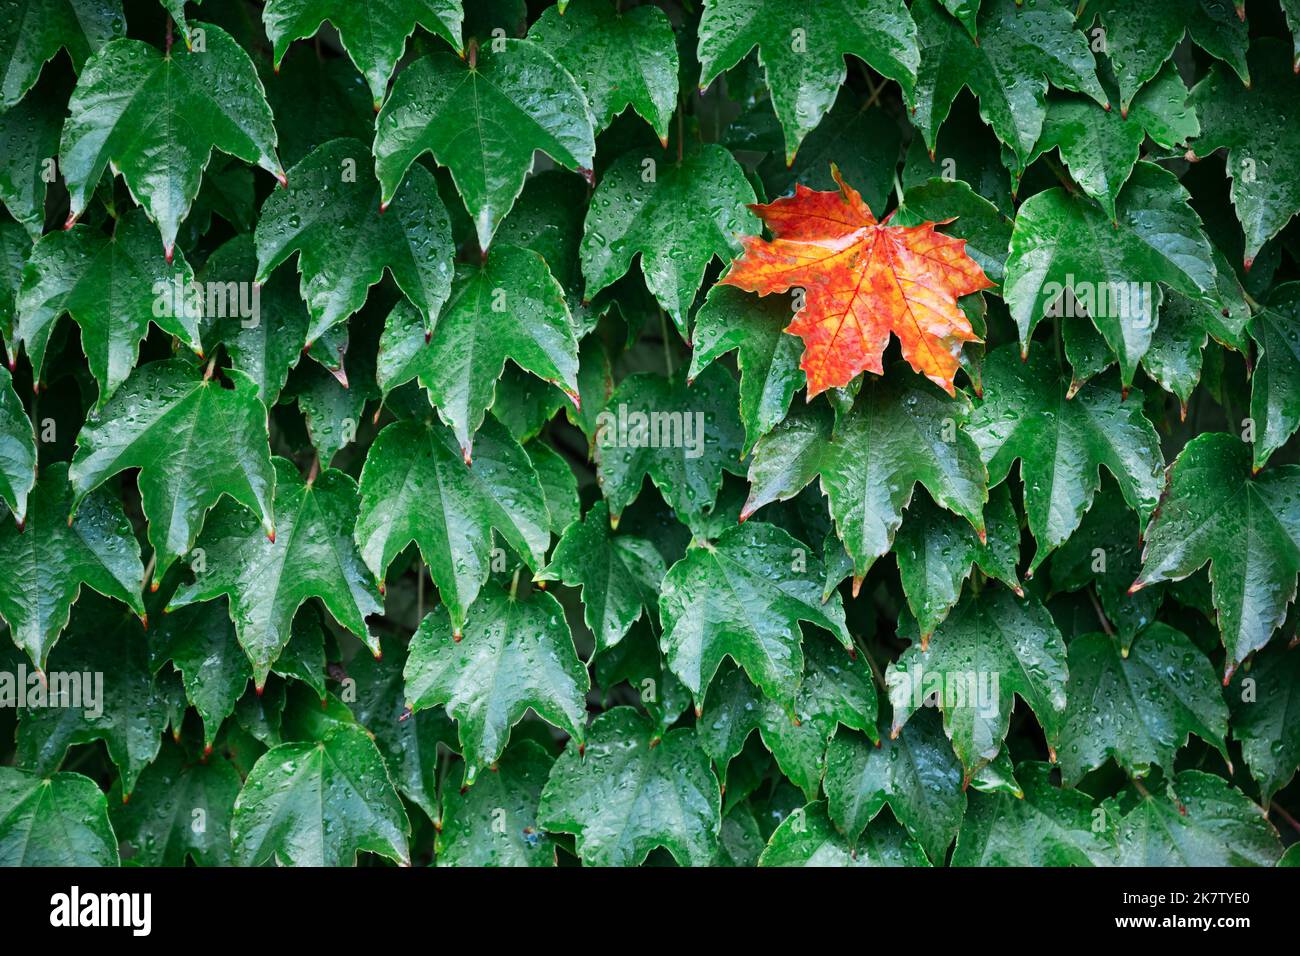 Closeup nature view of green creative layout made of single orange maple leaf in green leaves wall. Copyspace make using as natural green plants and ecology backdrop. Autumn nature background Stock Photo